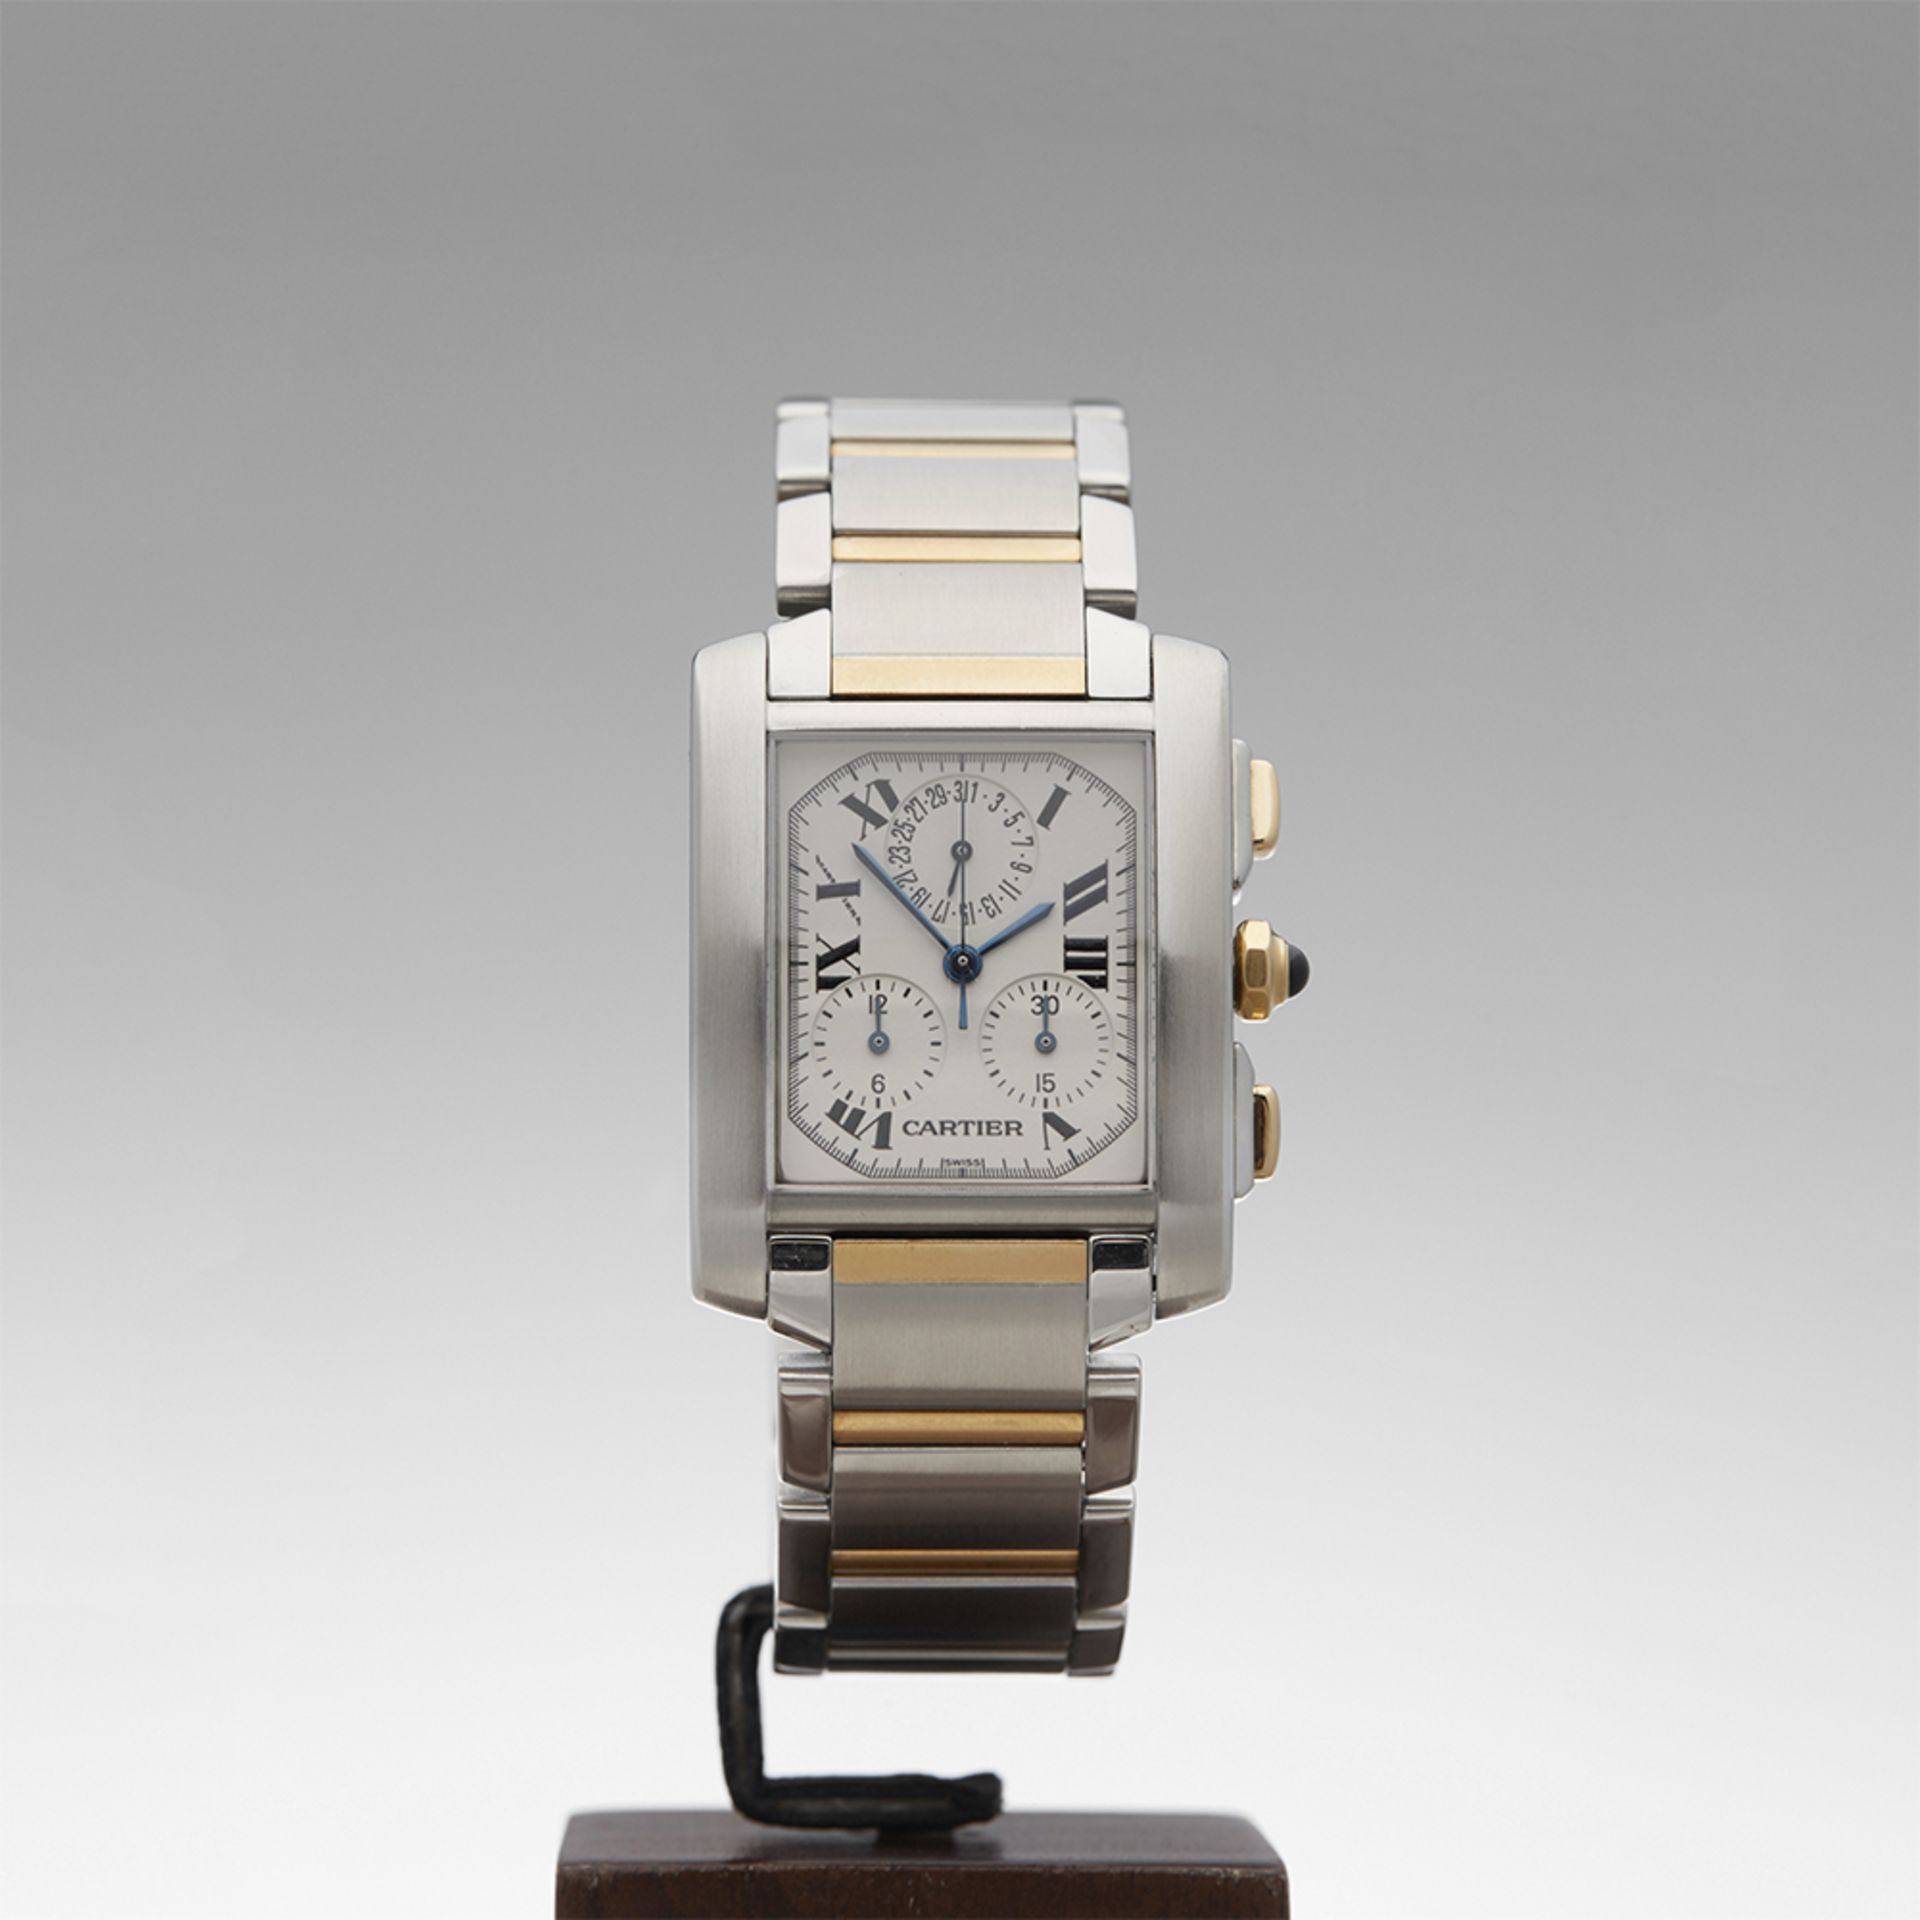 Cartier, Tank Francaise Chronoreflex 28mm Stainless Steel & 18k Yellow Gold 2303 or W51004Q4 - Image 2 of 9